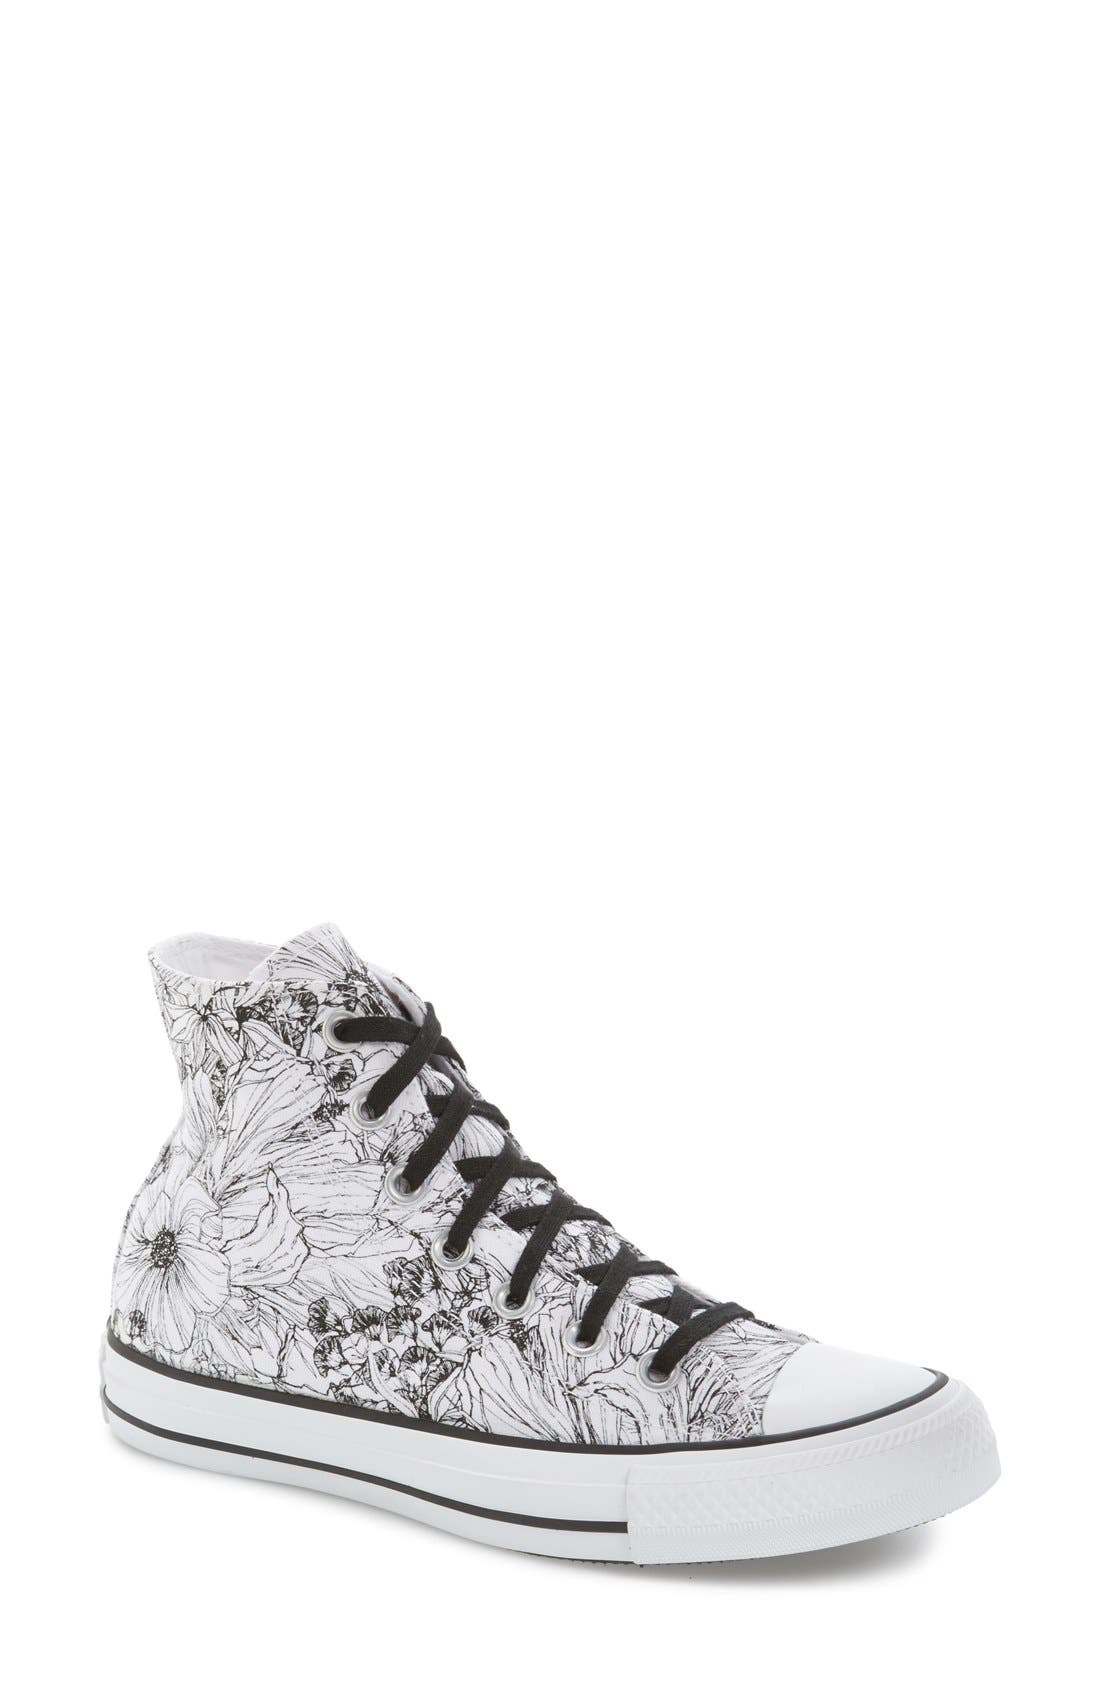 converse floral high tops